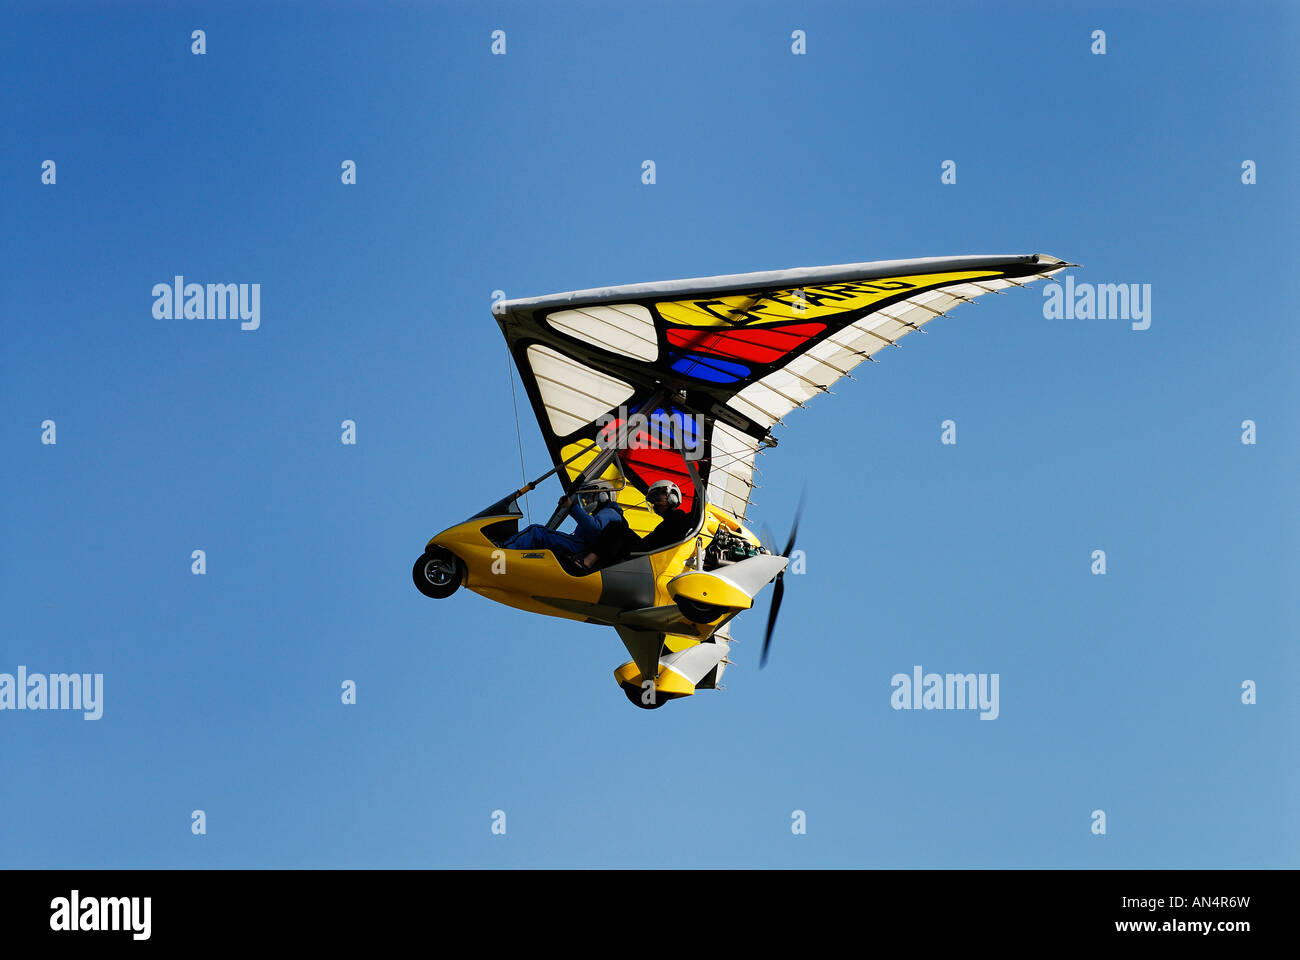 Lovely yellow Tanarg Microlite takes off into a blue sky at Popham. Stock Photo